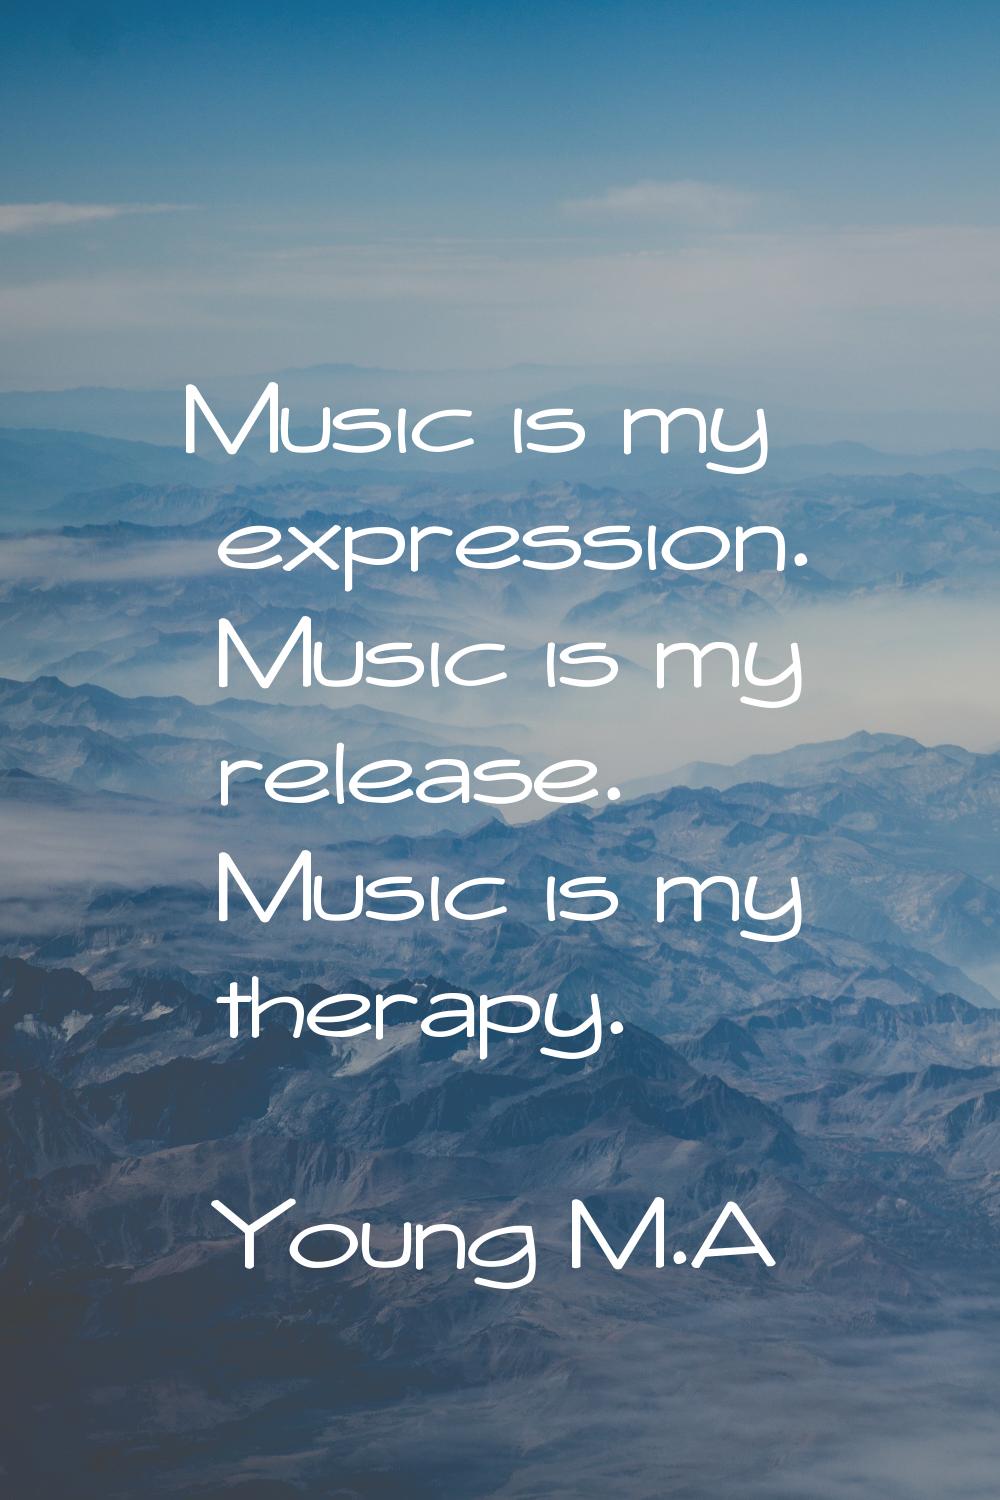 Music is my expression. Music is my release. Music is my therapy.